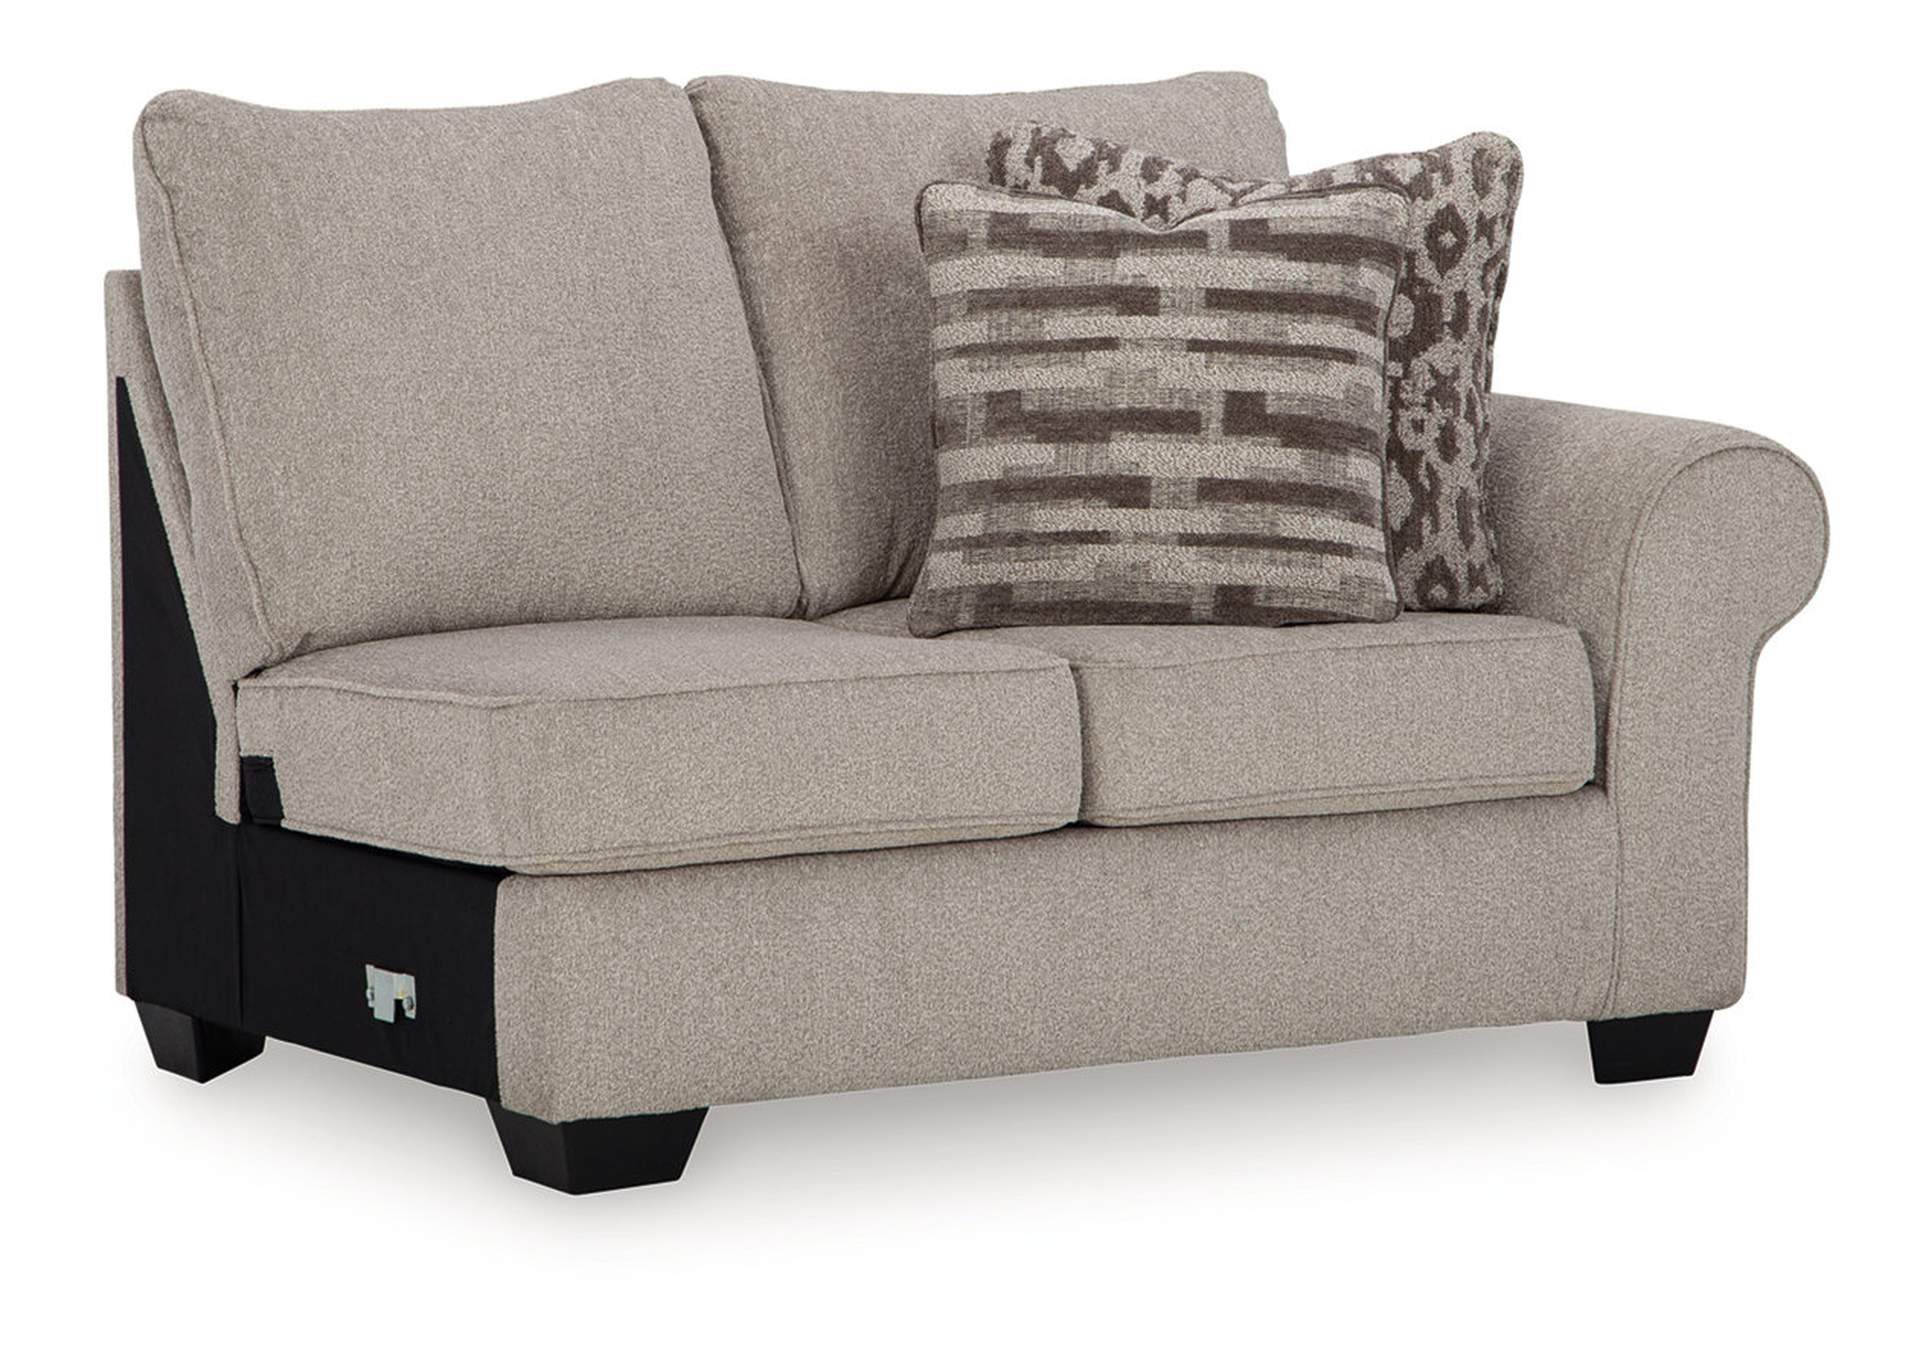 Claireah Right-Arm Facing Loveseat,Signature Design By Ashley